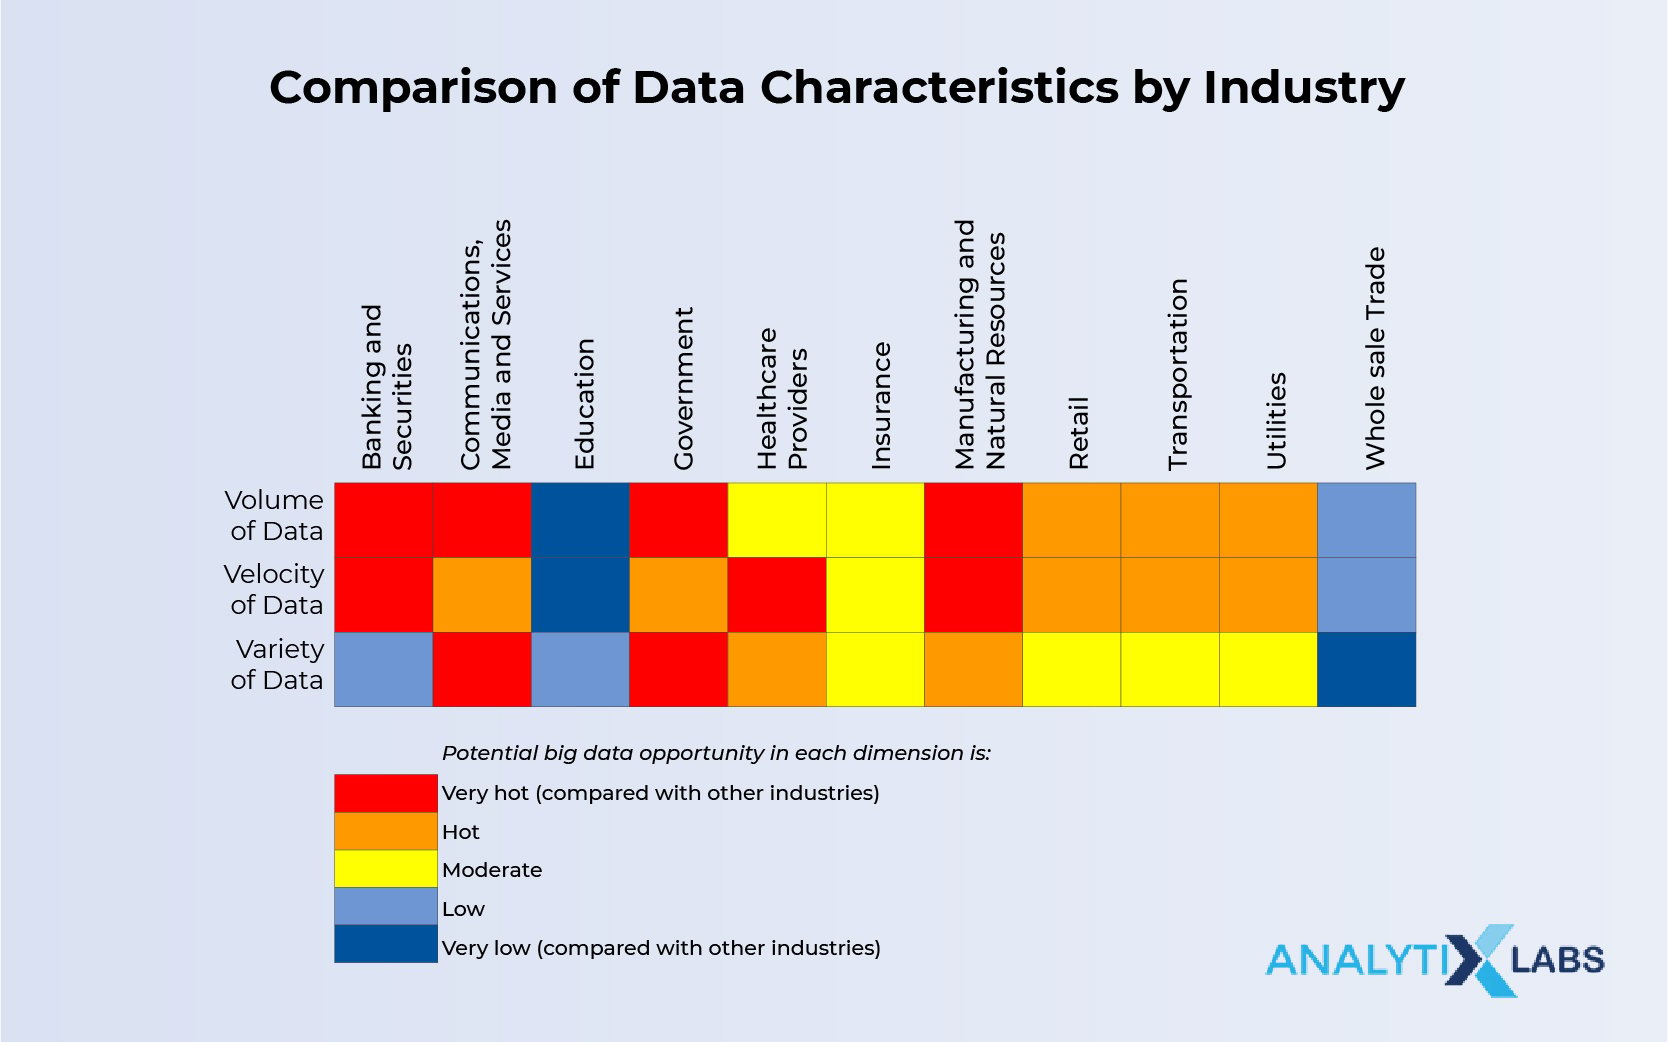 Data Characteristics by different industries